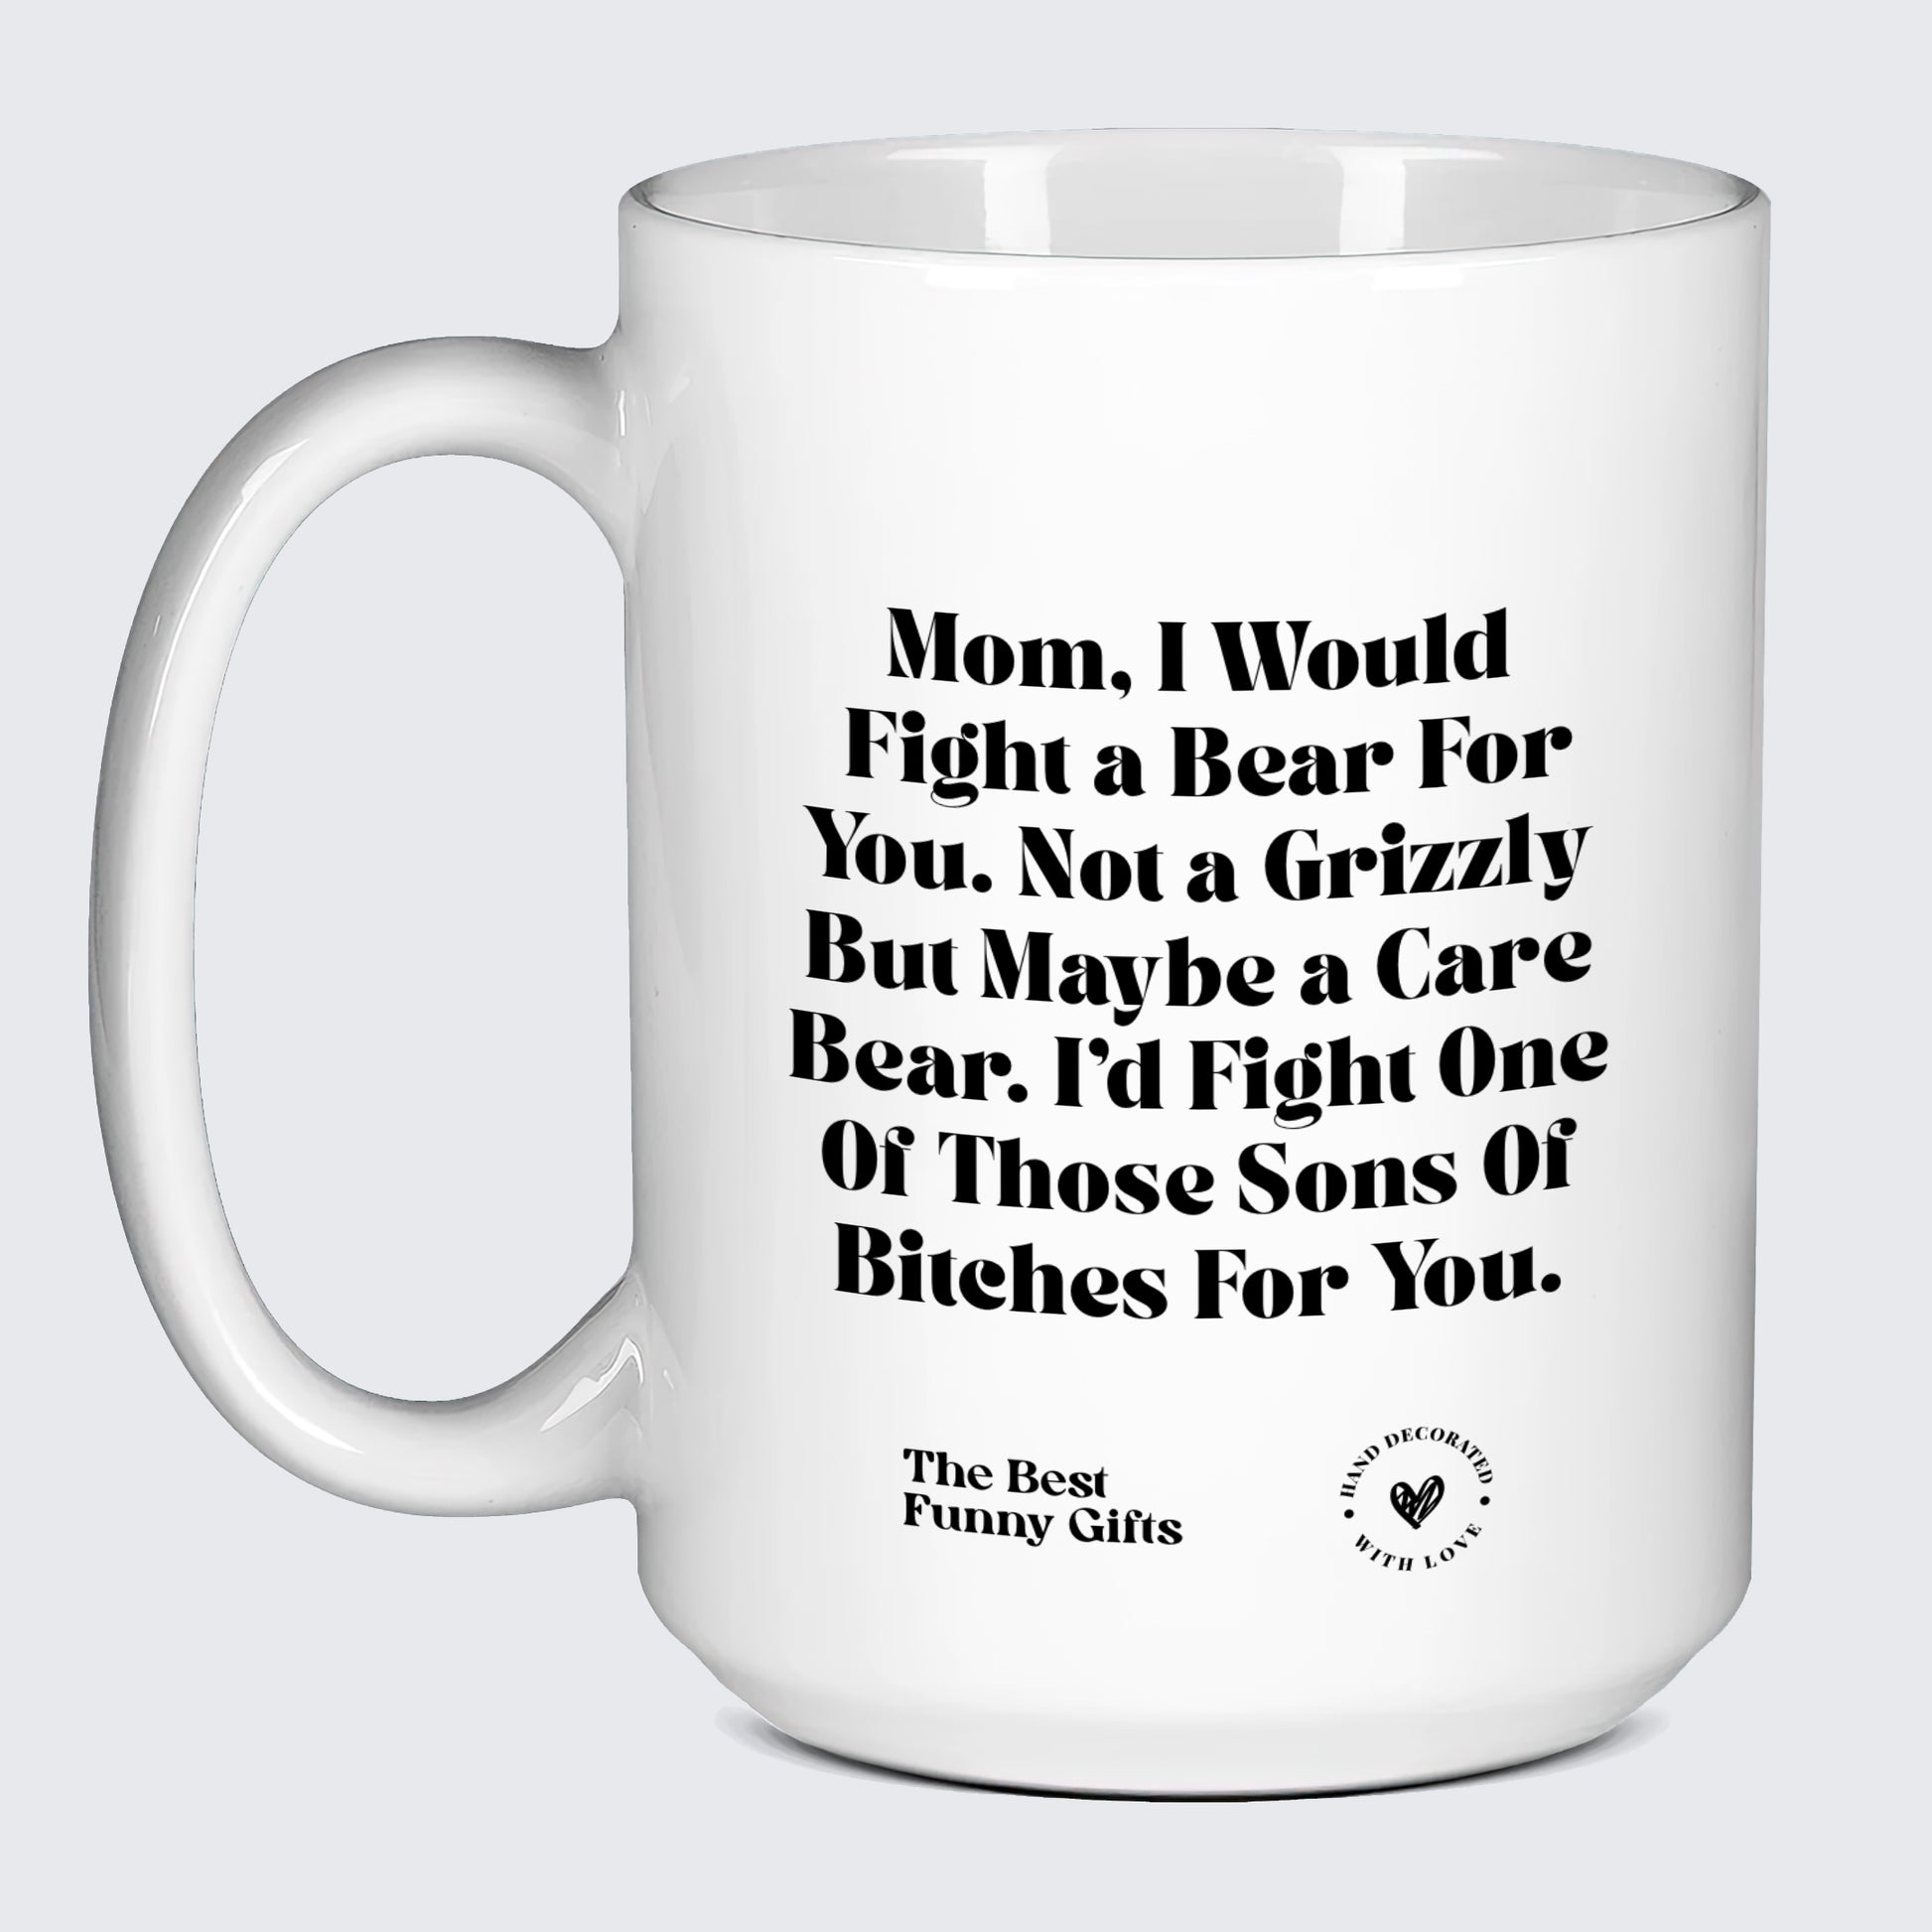 Mugs For Mom Mom, I Would Fight a Bear for You. Not a Grizzly but Maybe a Care Bear. I'd Fight One of Those Sons of Bitches for You. - The Best Funny Gifts